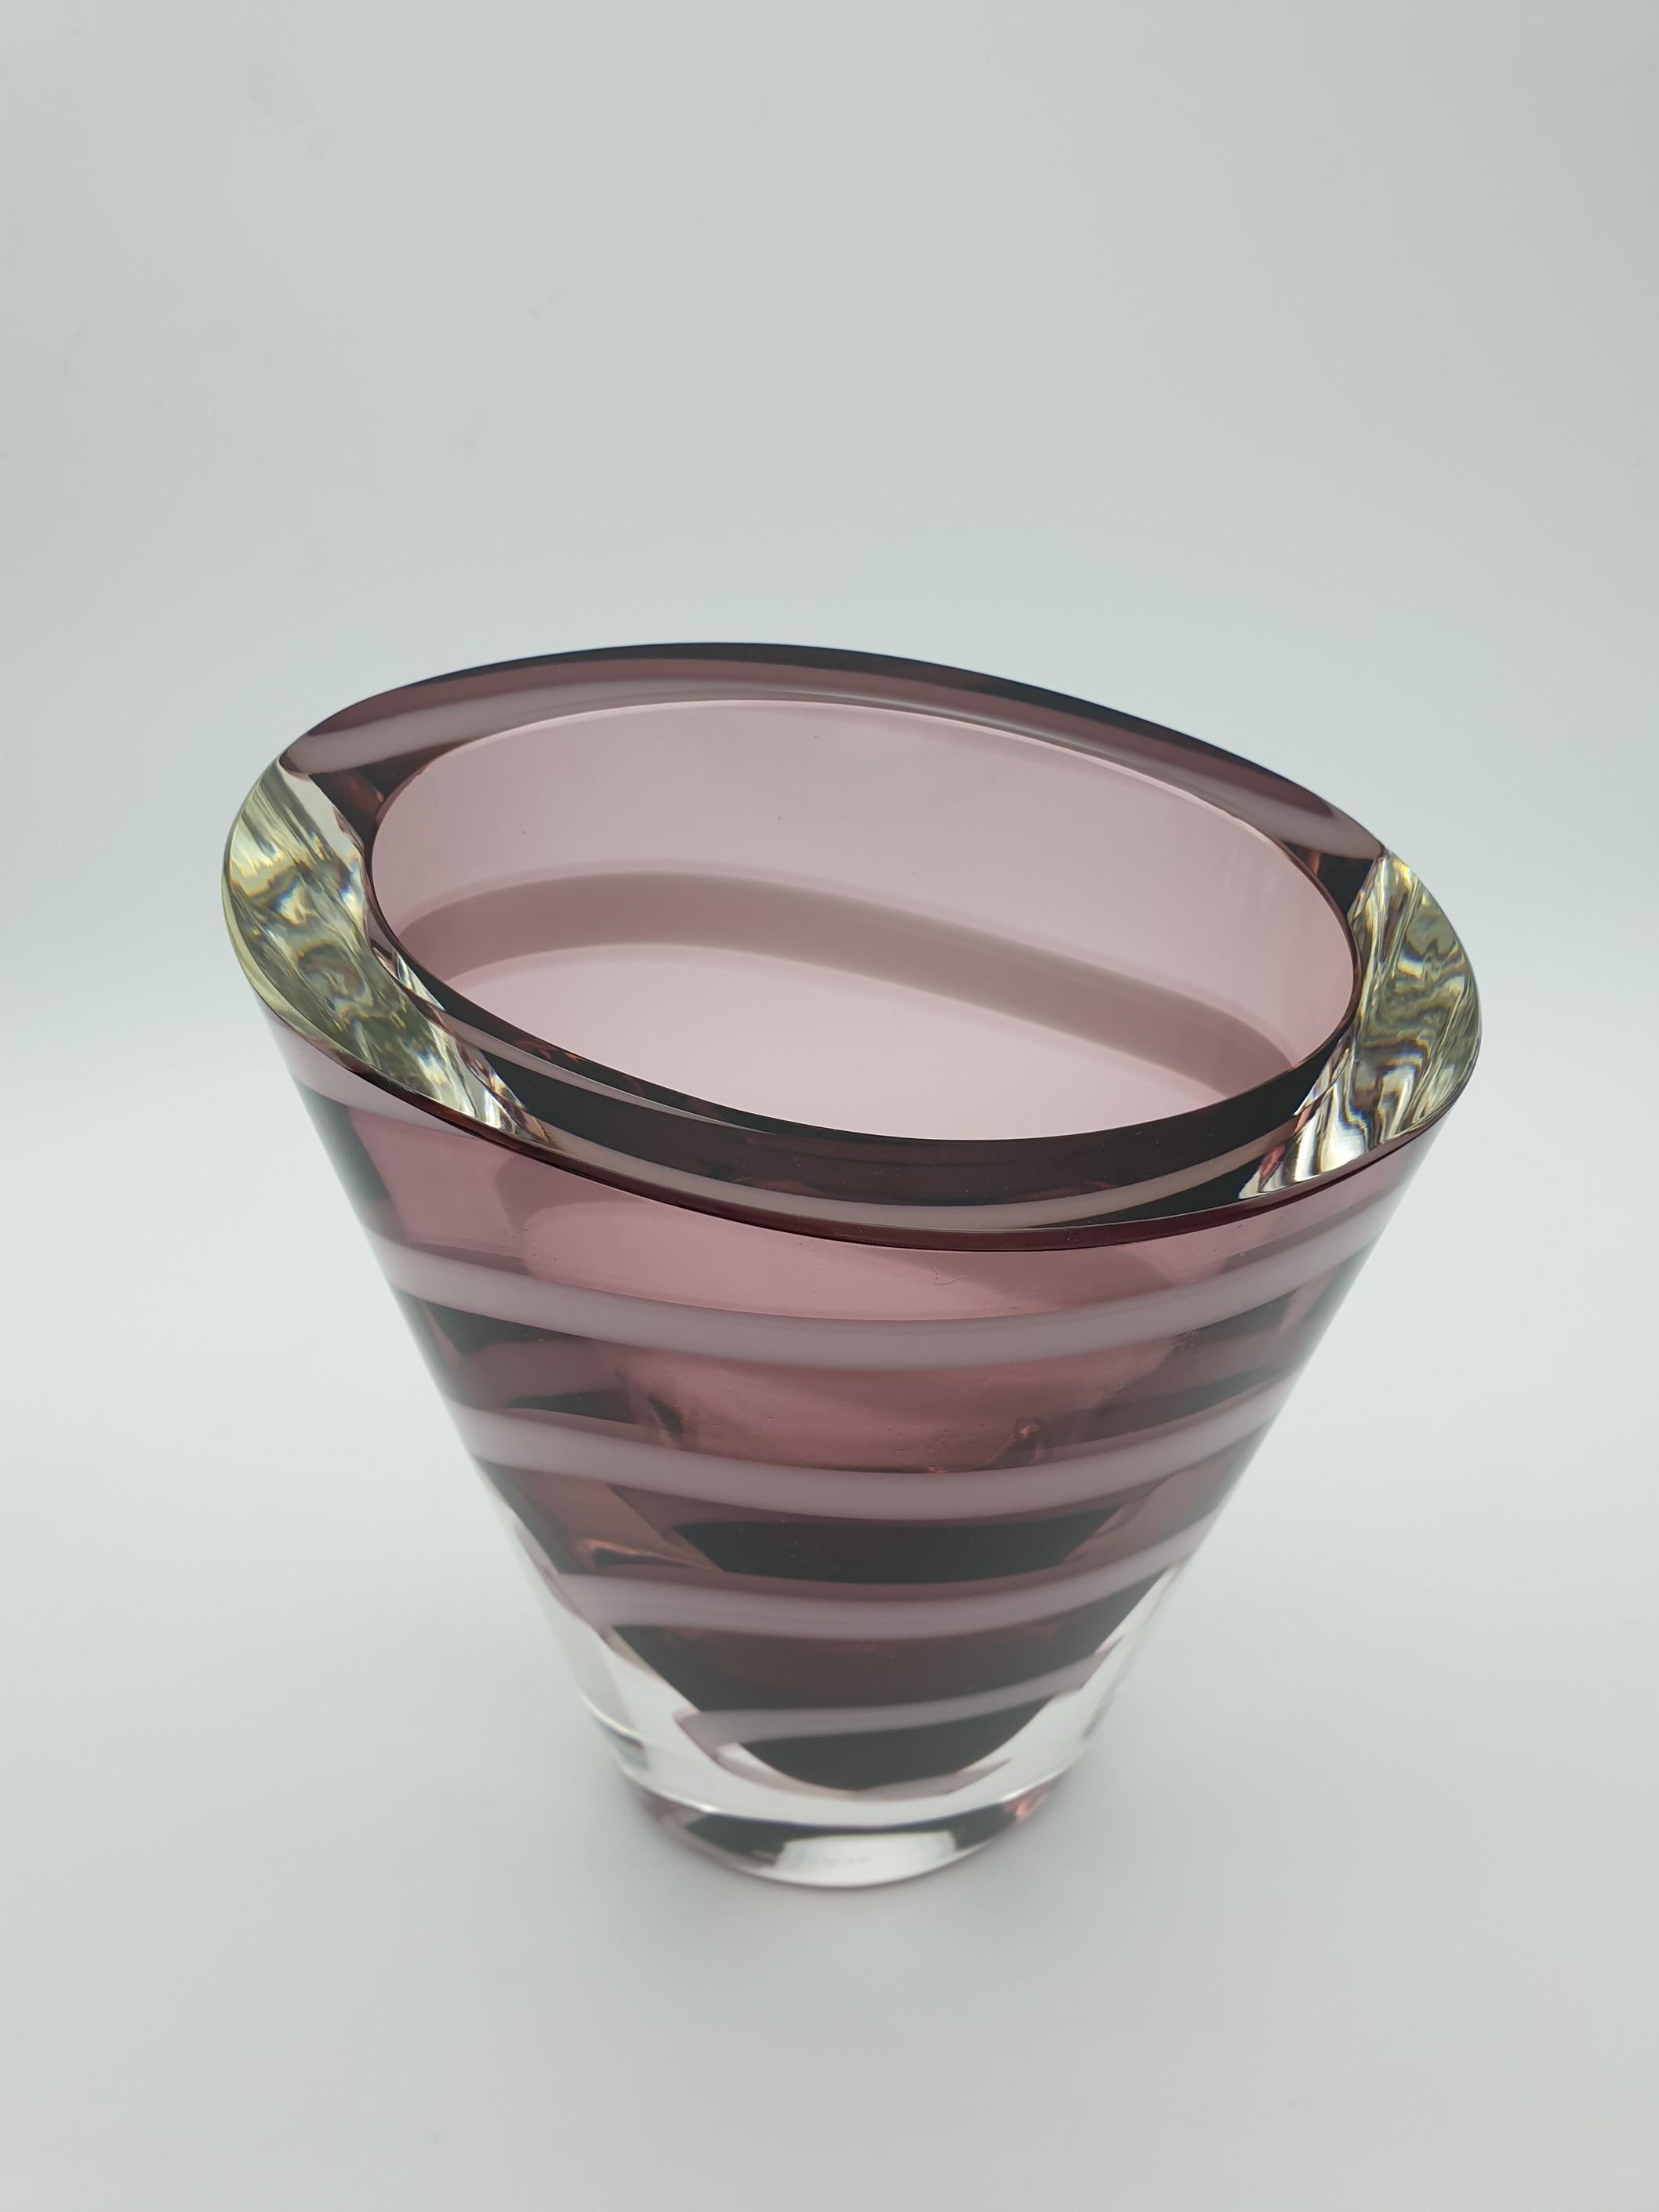 Italian Contemporary Solid Murano Glass Vase by Cenedese, late 1990s For Sale